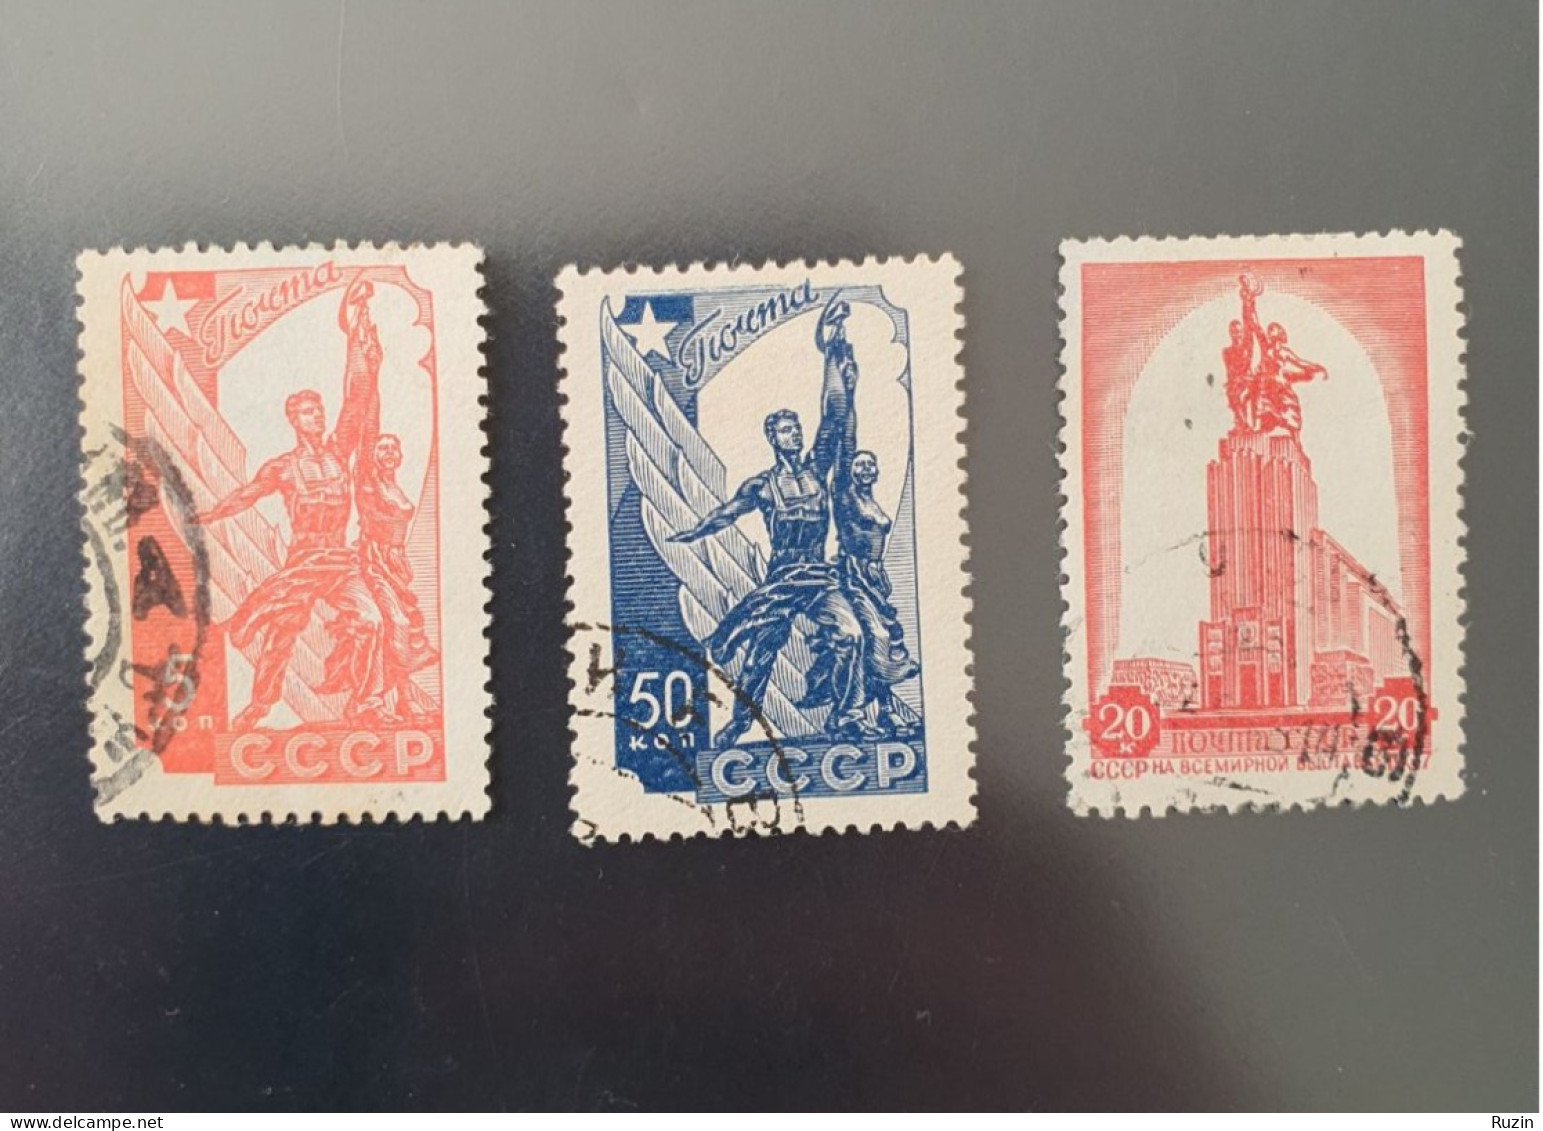 Soviet Union (SSSR) - 1938 - Russia Participating At The International Exhibition In Paris - Used Stamps